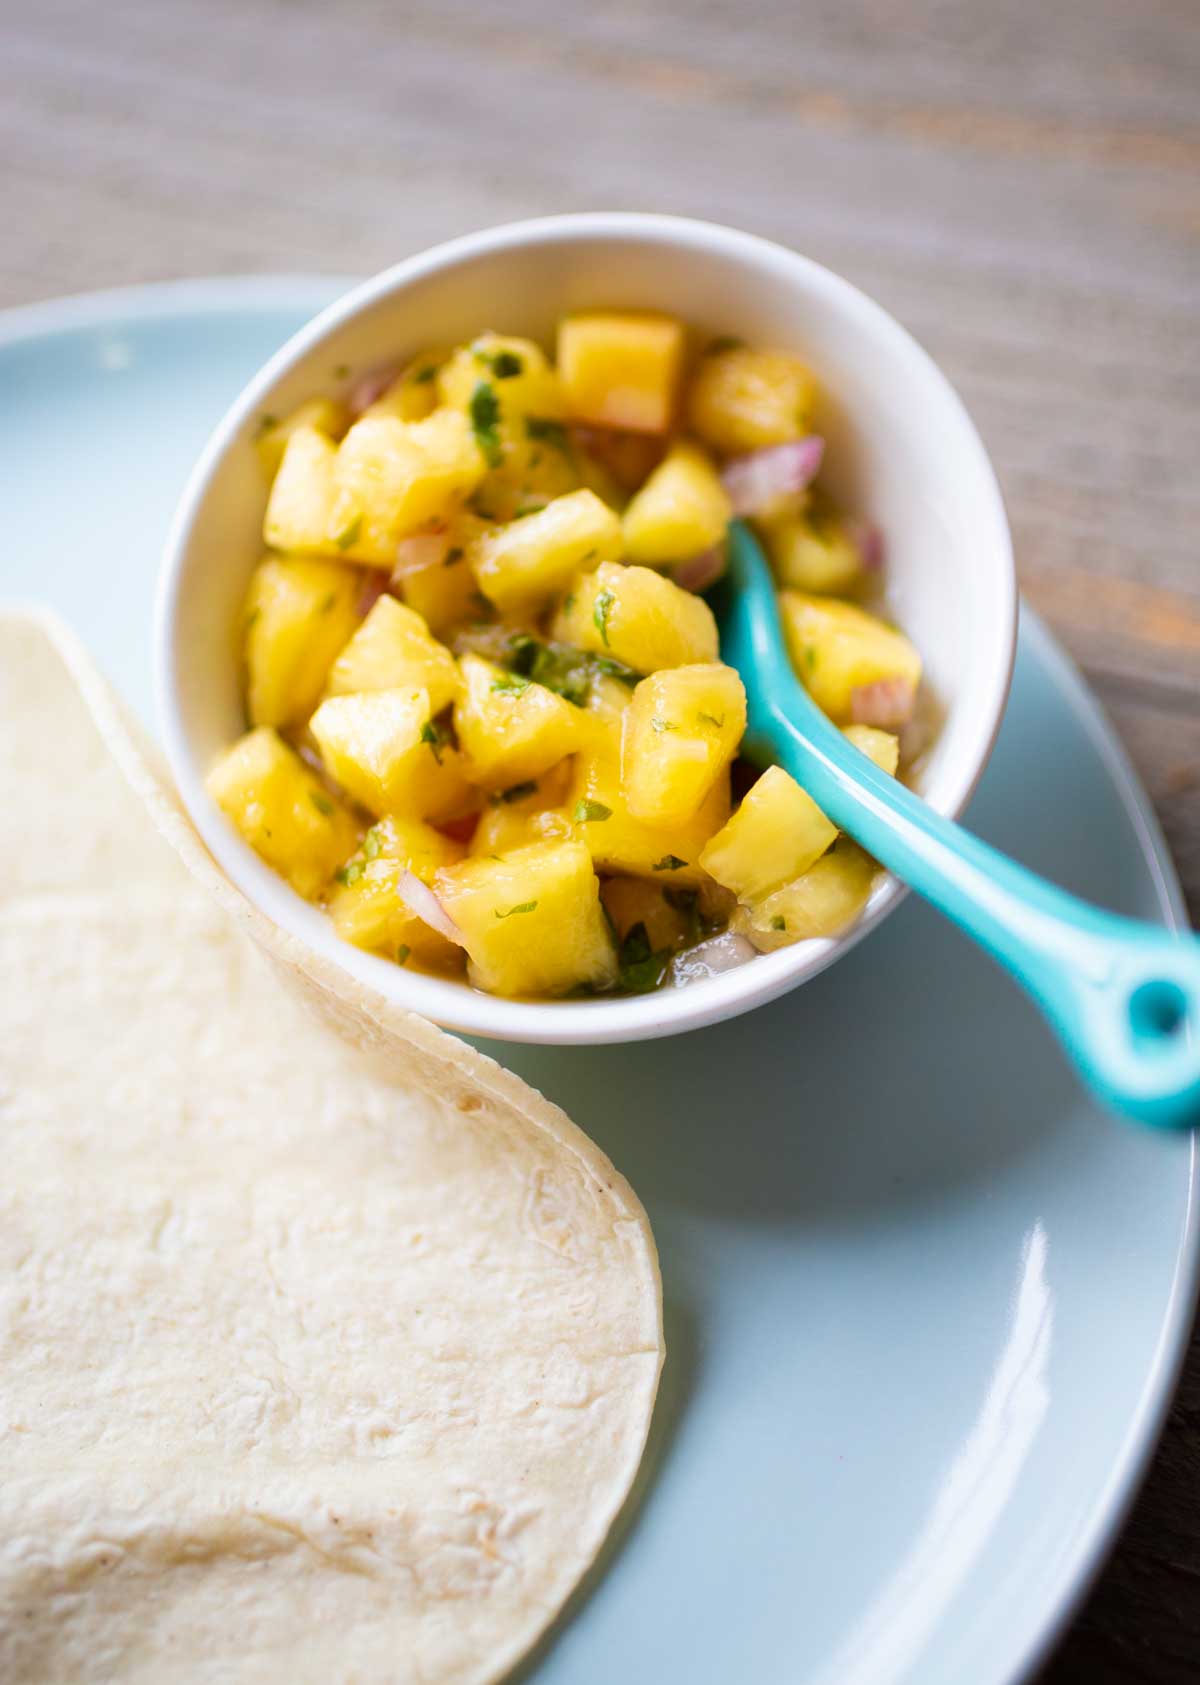 A small white bowl filled with pineapple salsa and a blue spoon.